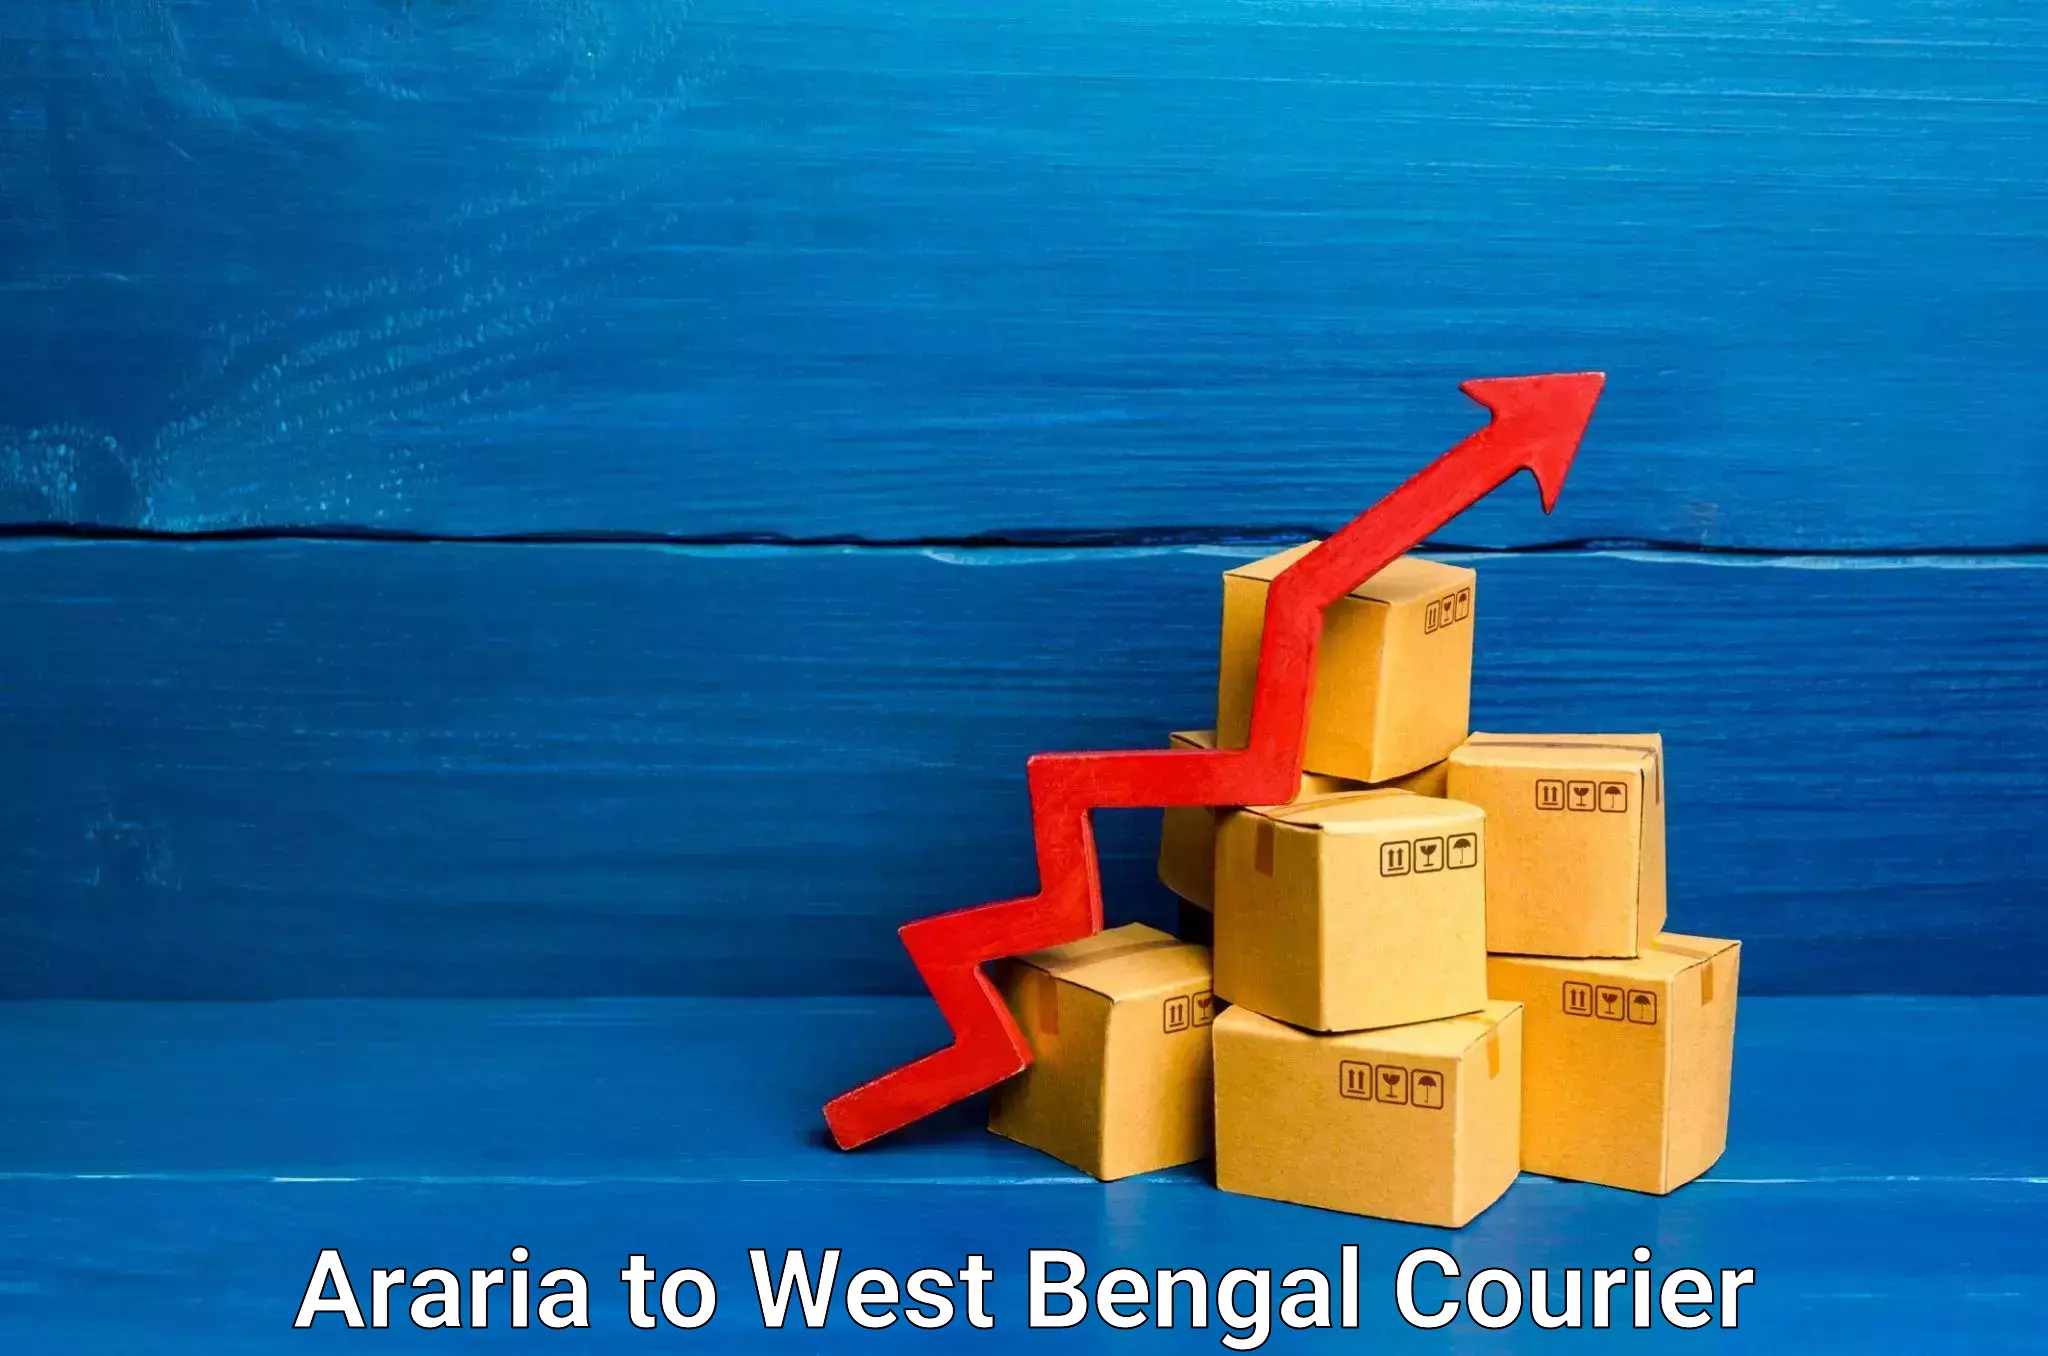 Furniture moving experts Araria to West Bengal